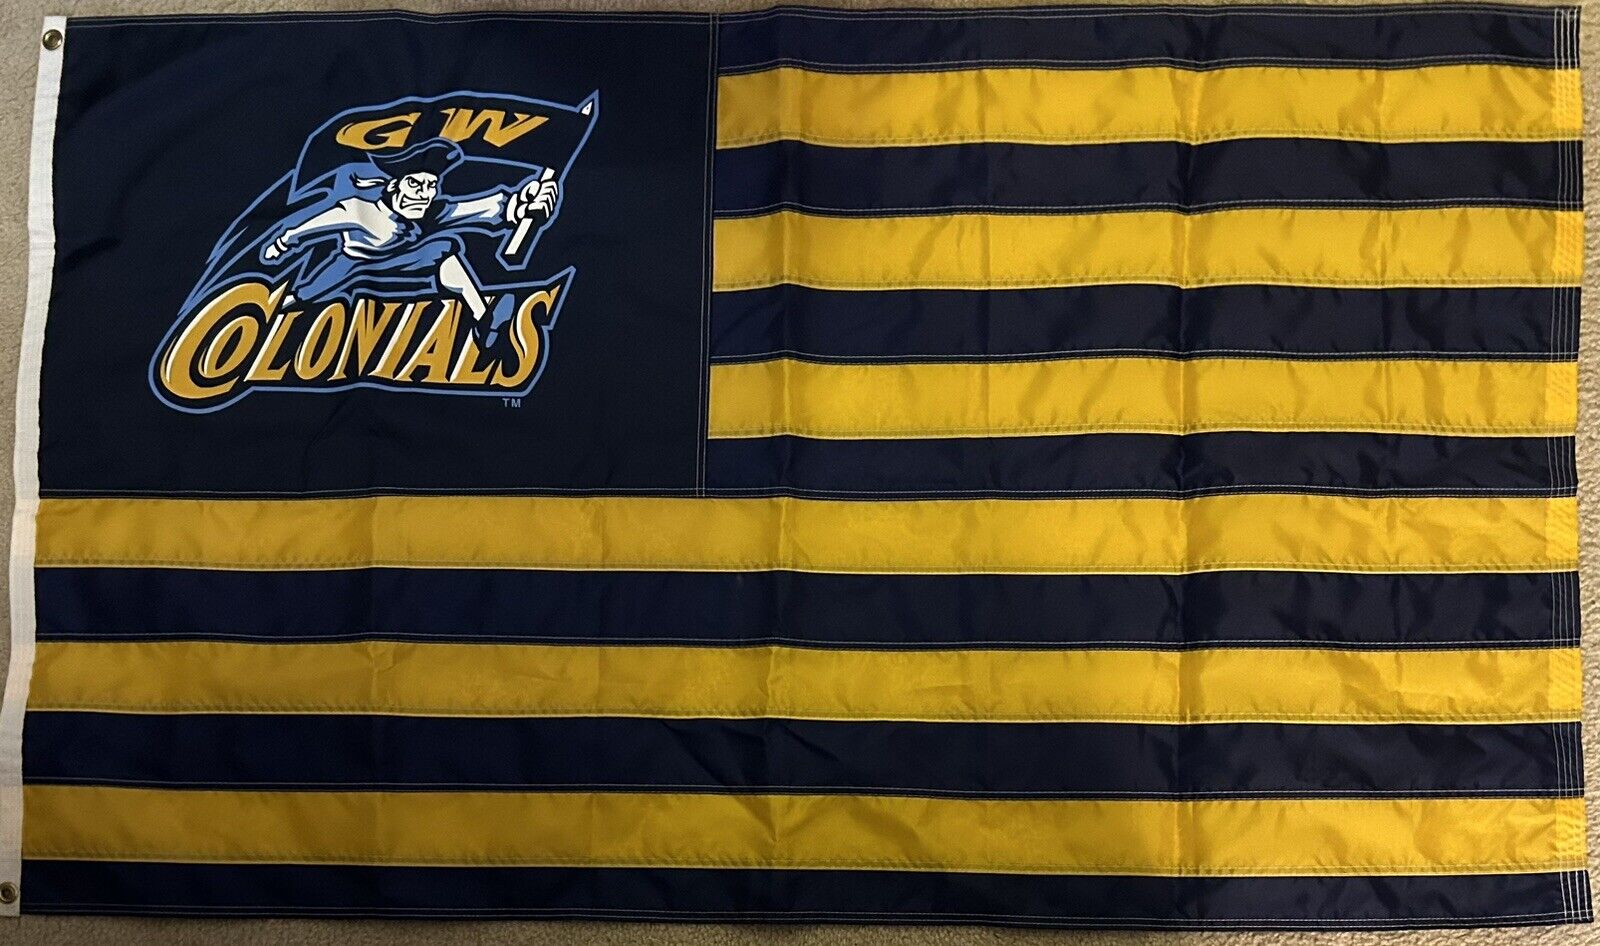 Vtg GWU Old Colonials Flag Special Edition, 3x5 ft, Never Used Rare